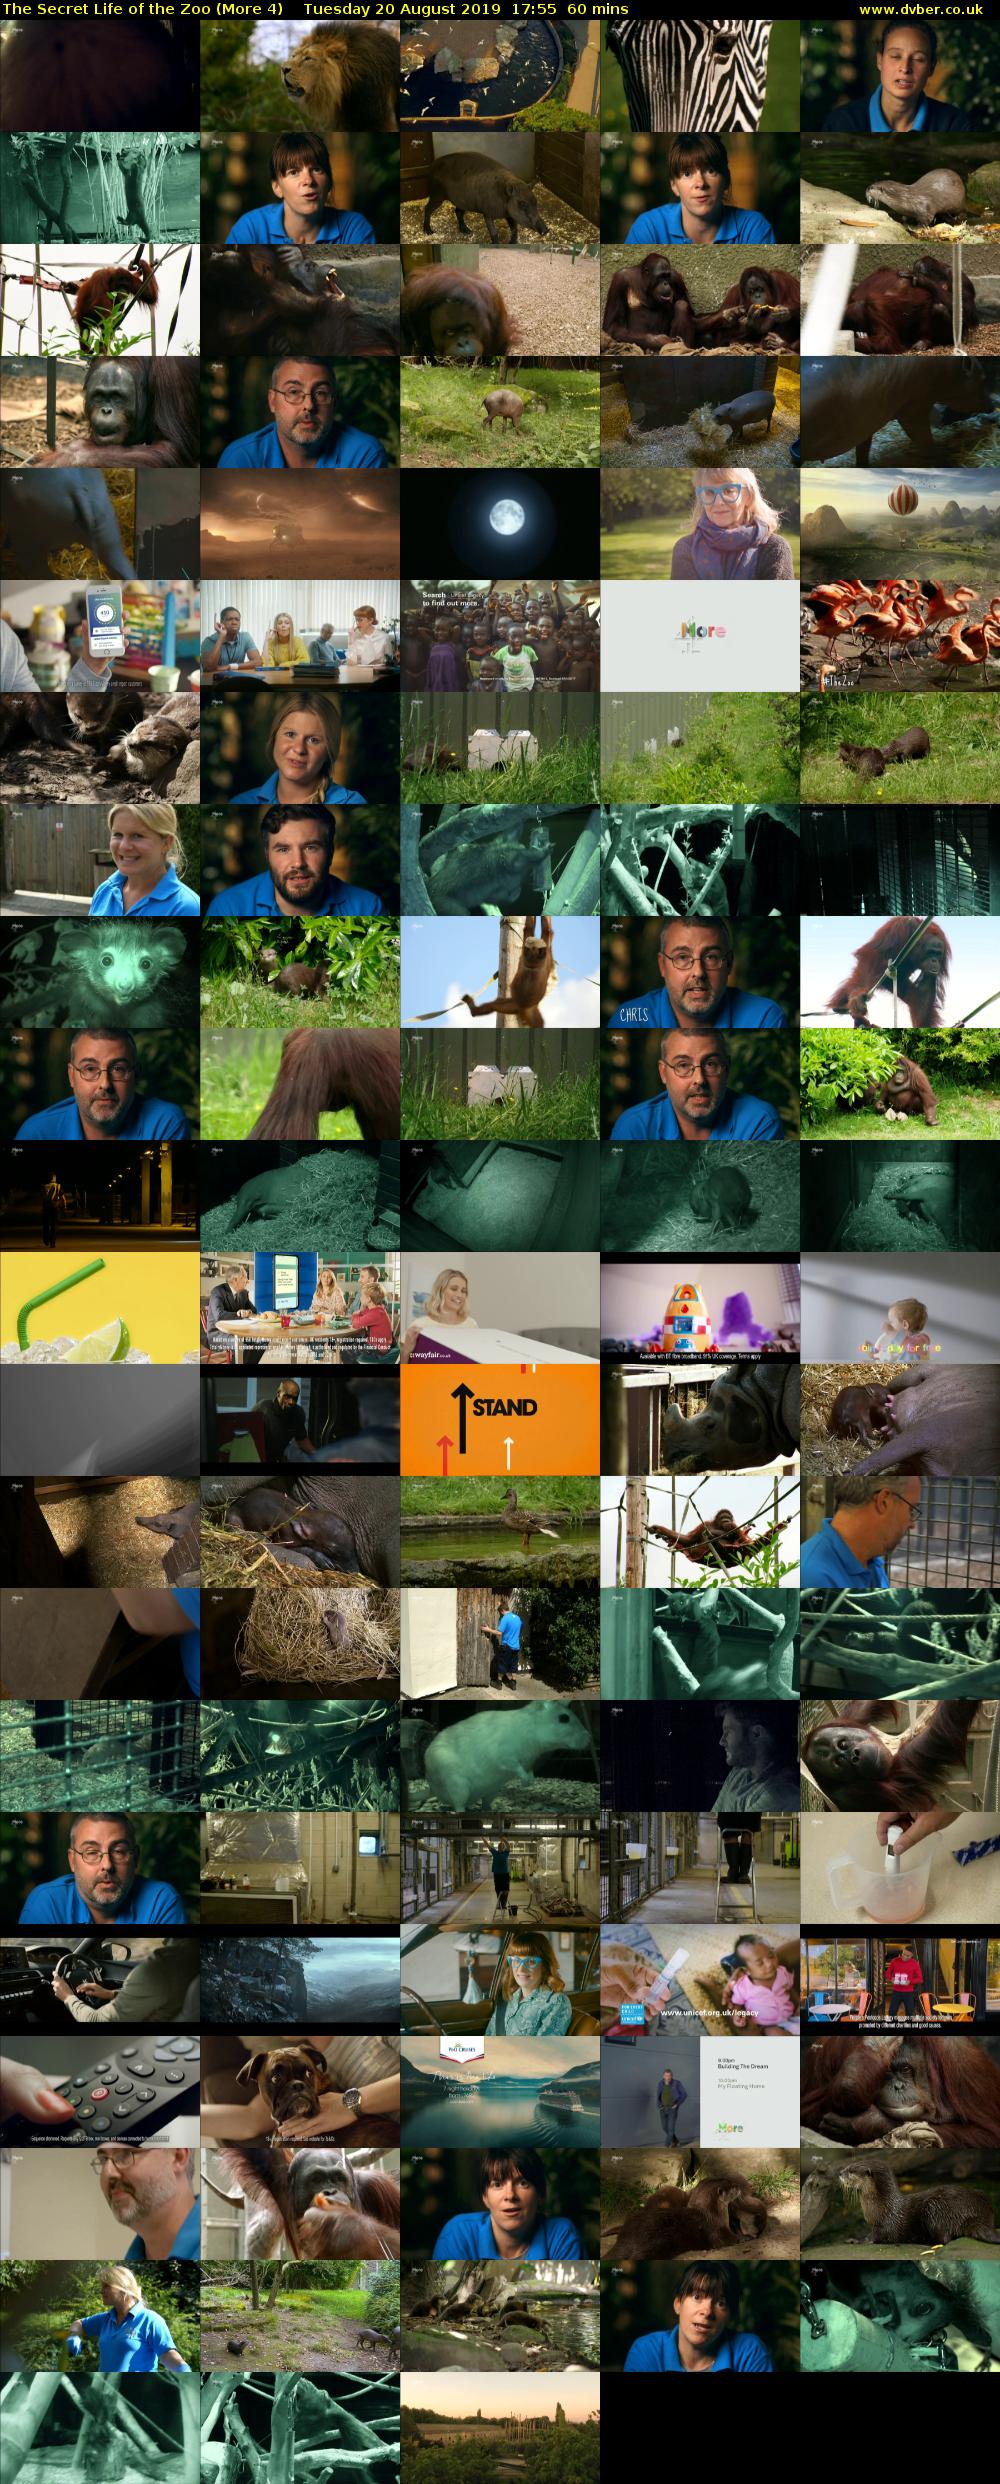 The Secret Life of the Zoo (More 4) Tuesday 20 August 2019 17:55 - 18:55